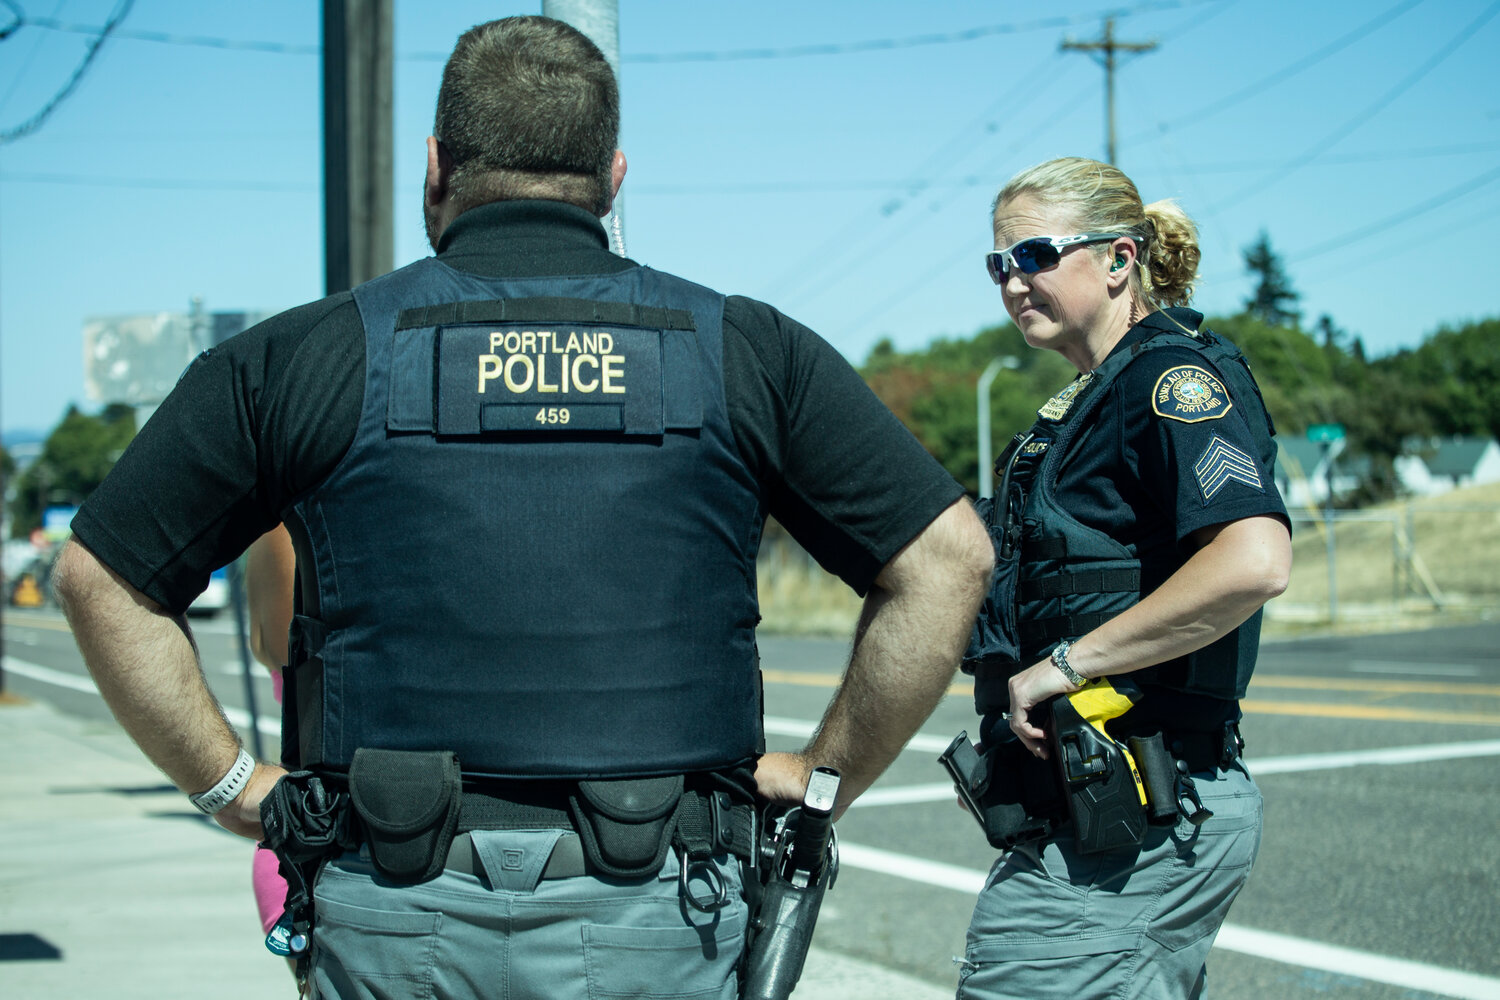 Detective Tim Larsen and Sgt. Kristi Butcher, members of the Portland Police Bureau’s Human Trafficking Unit, gather information from an adult who they suspect is a victim of sex trafficking during a directed patrol mission in July. Larsen and Butcher say many adult trafficking victims were first trafficked as minors. (Moriah Ratner/InvestigateWest)